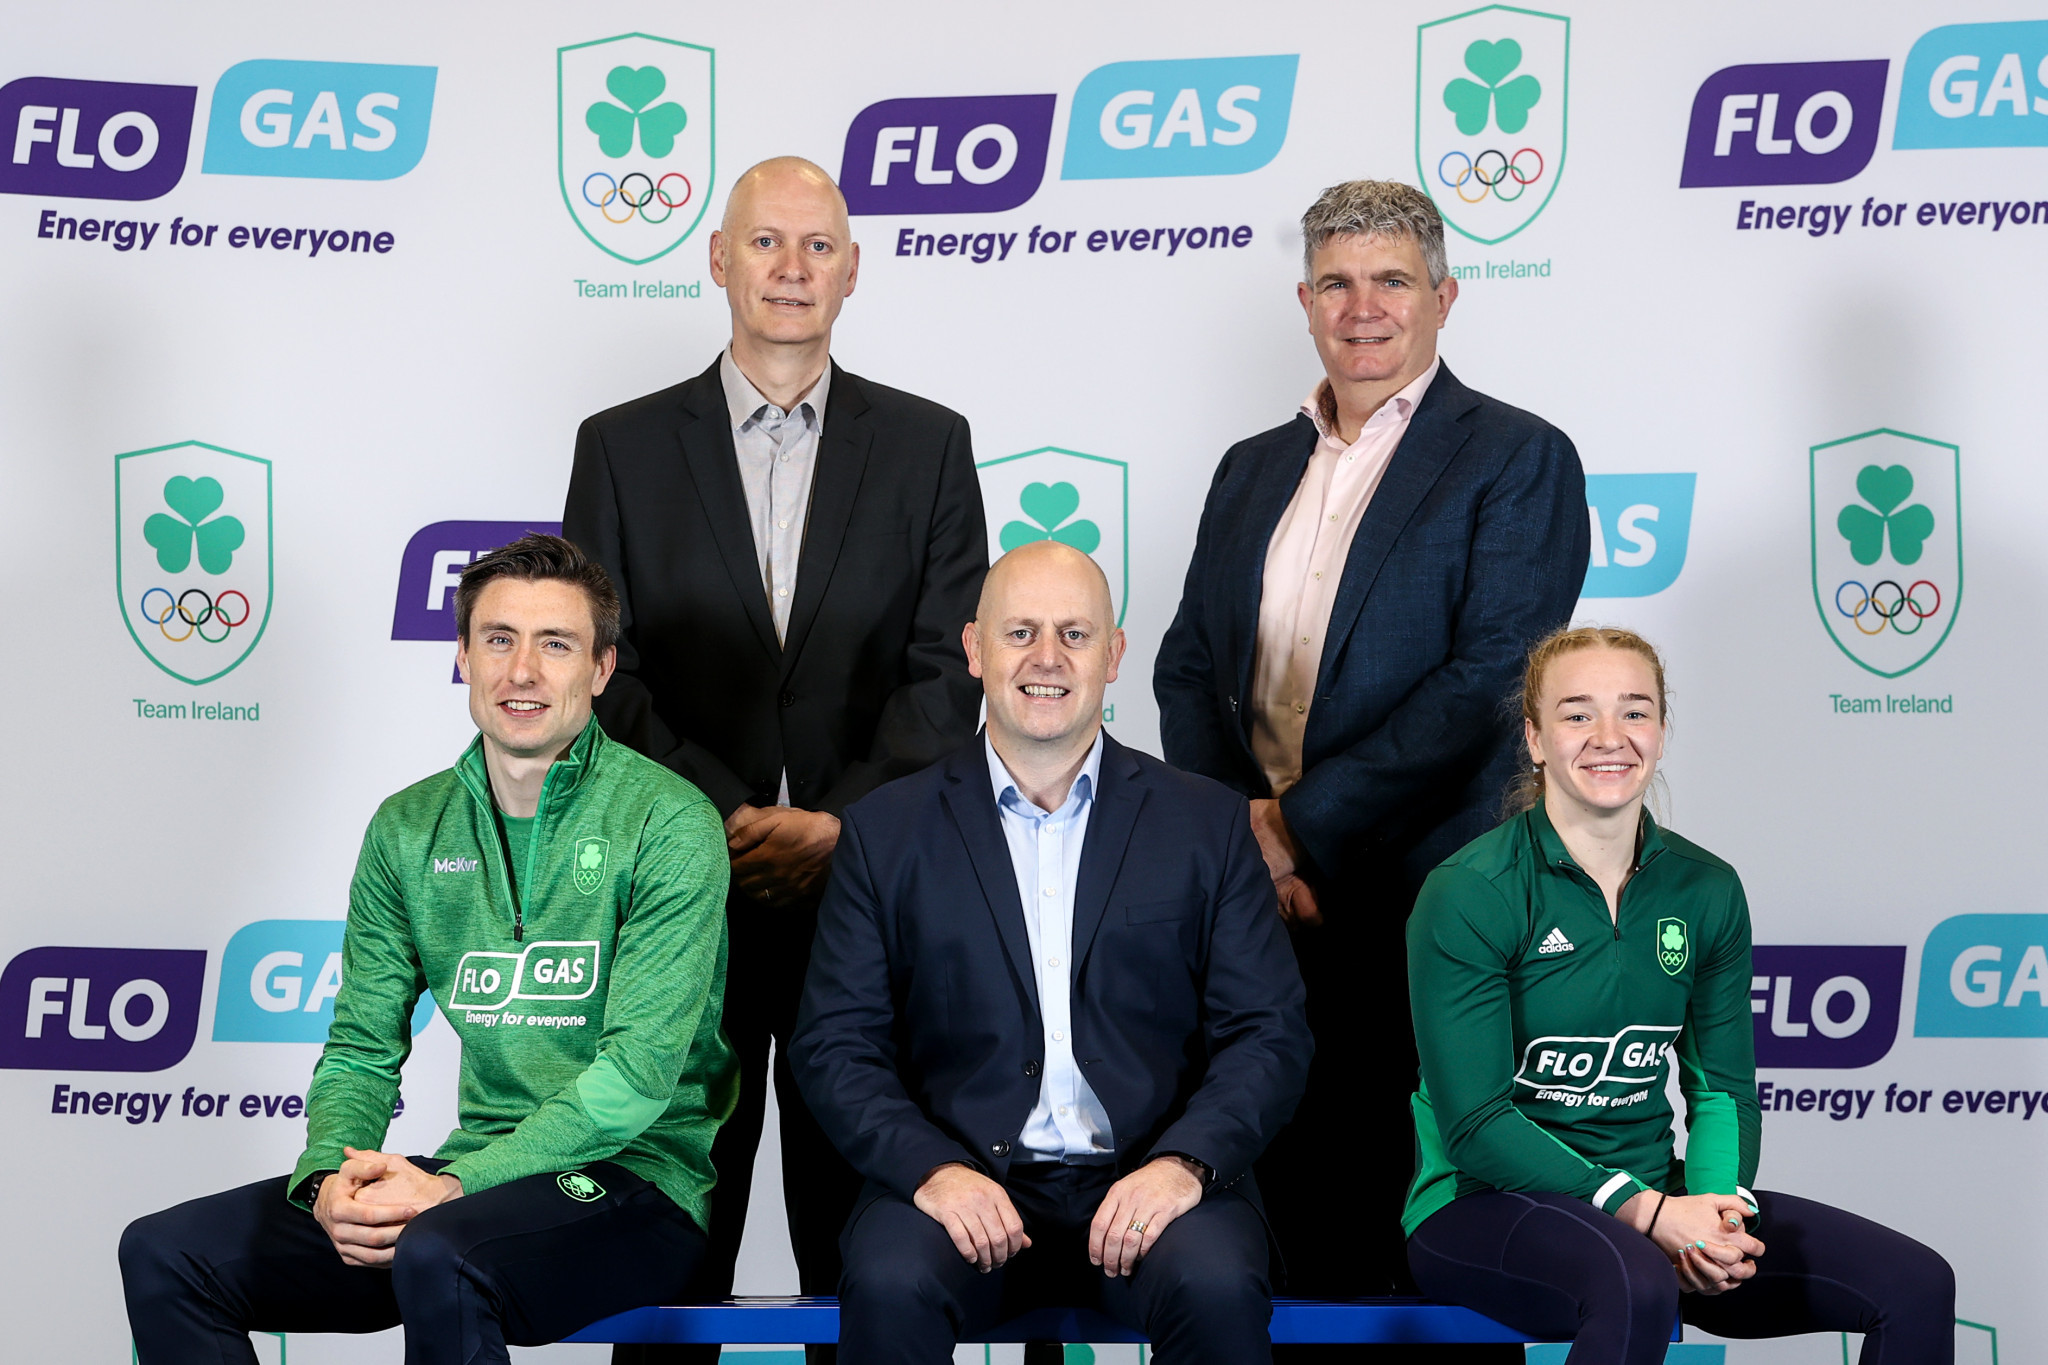 The Olympic Federation of Ireland has signed a Paris 2024 sponsorship deal with Flogas ©OFI